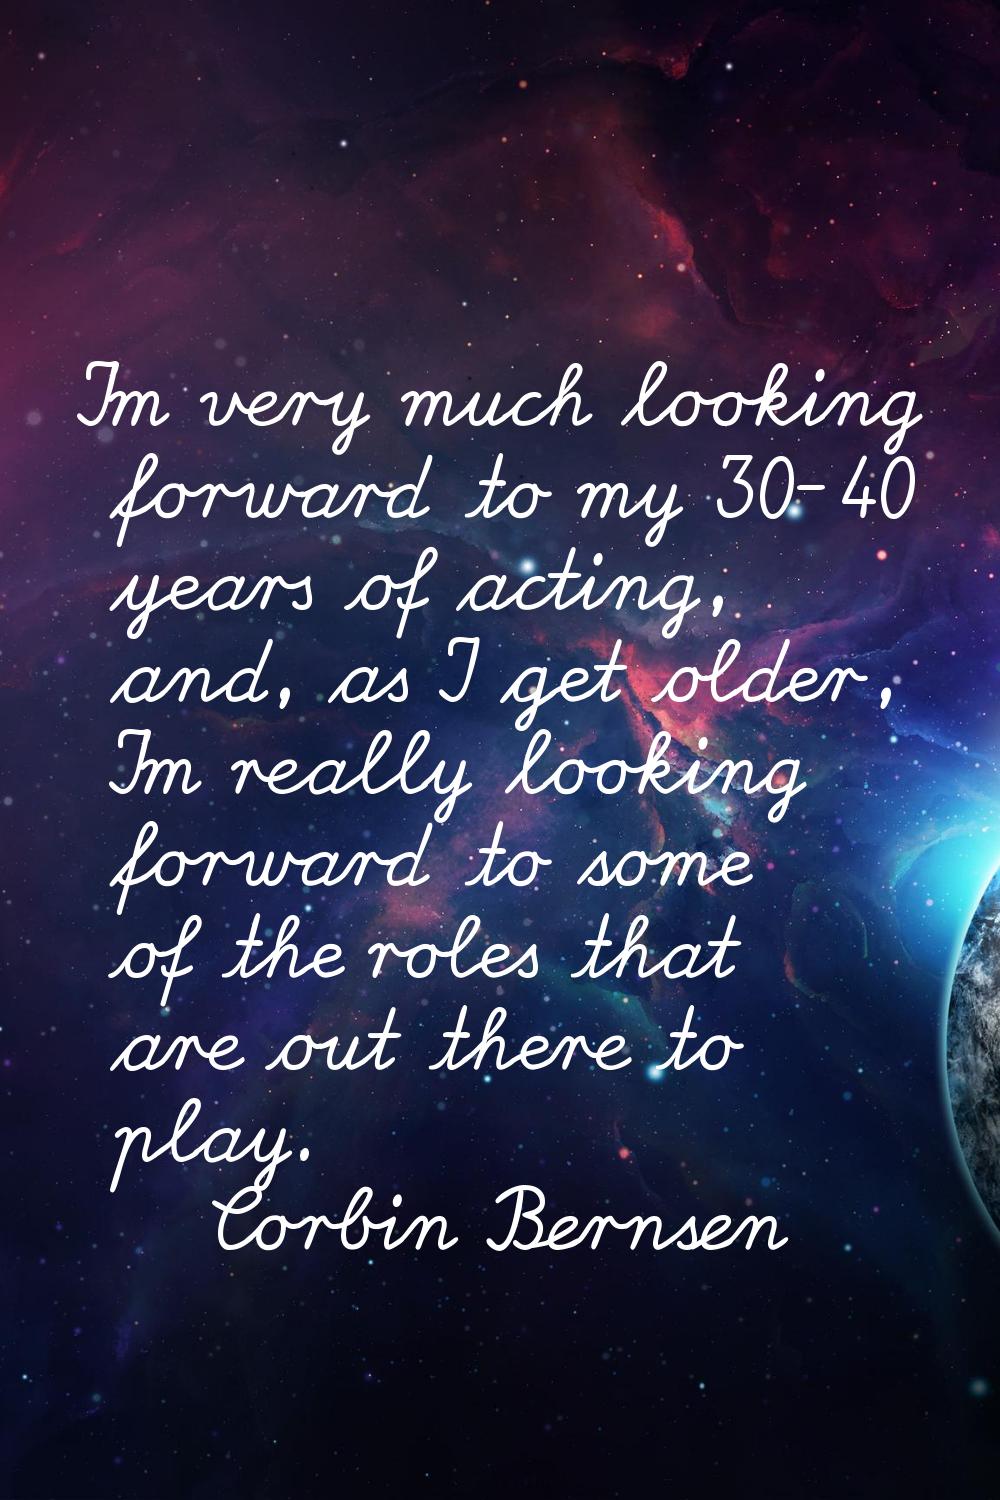 I'm very much looking forward to my 30-40 years of acting, and, as I get older, I'm really looking 